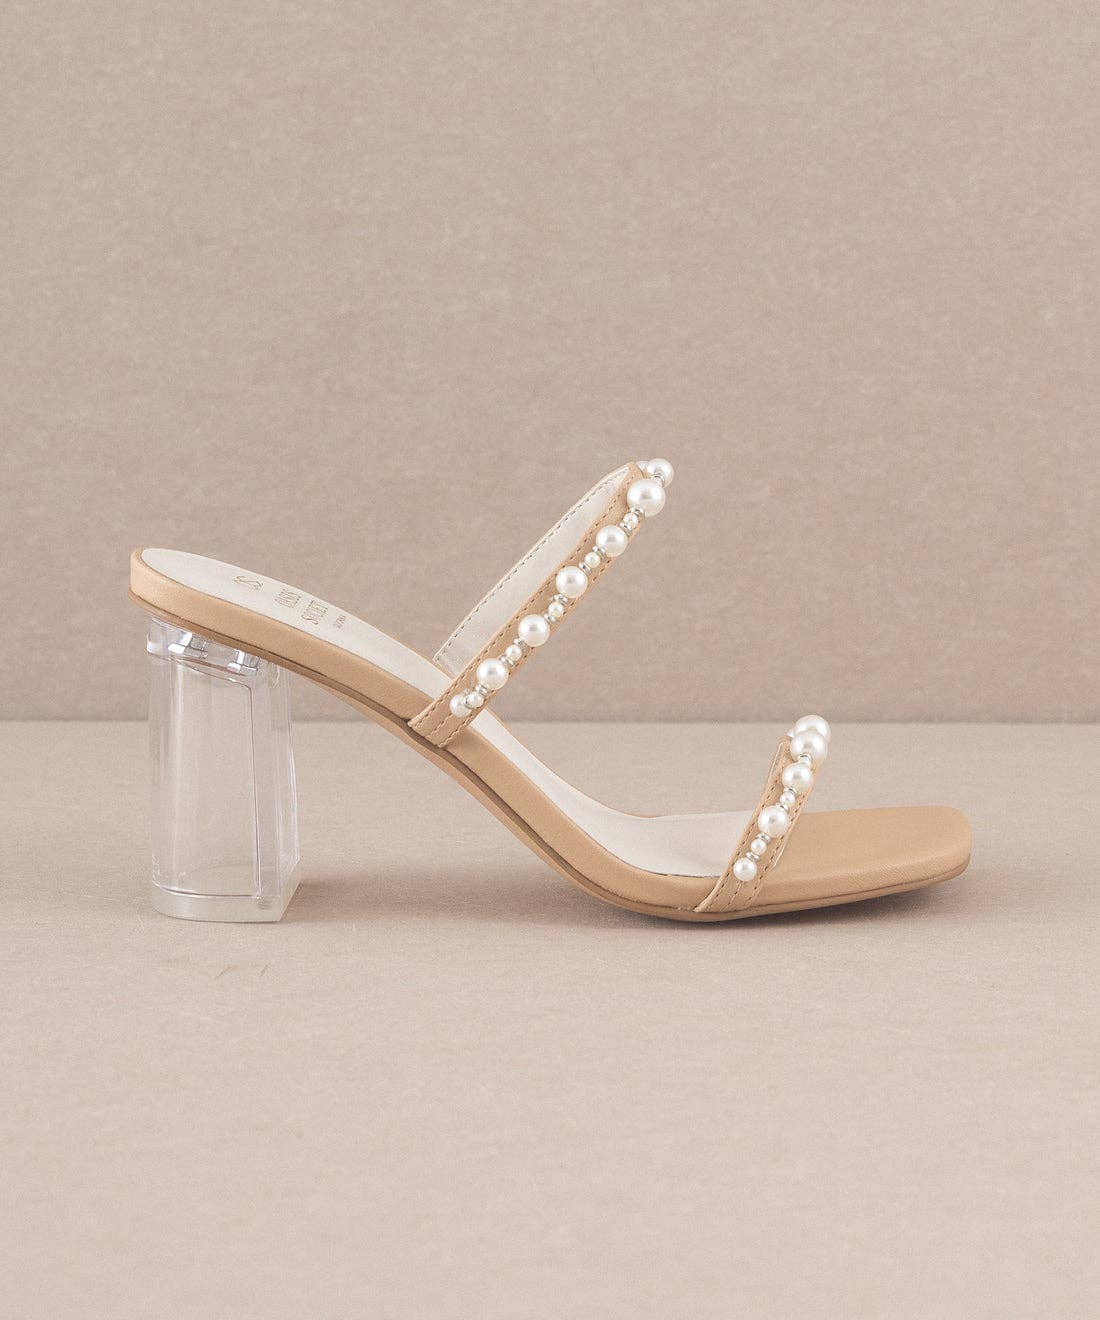 The Maeve Nude Strappy Pearl Heel